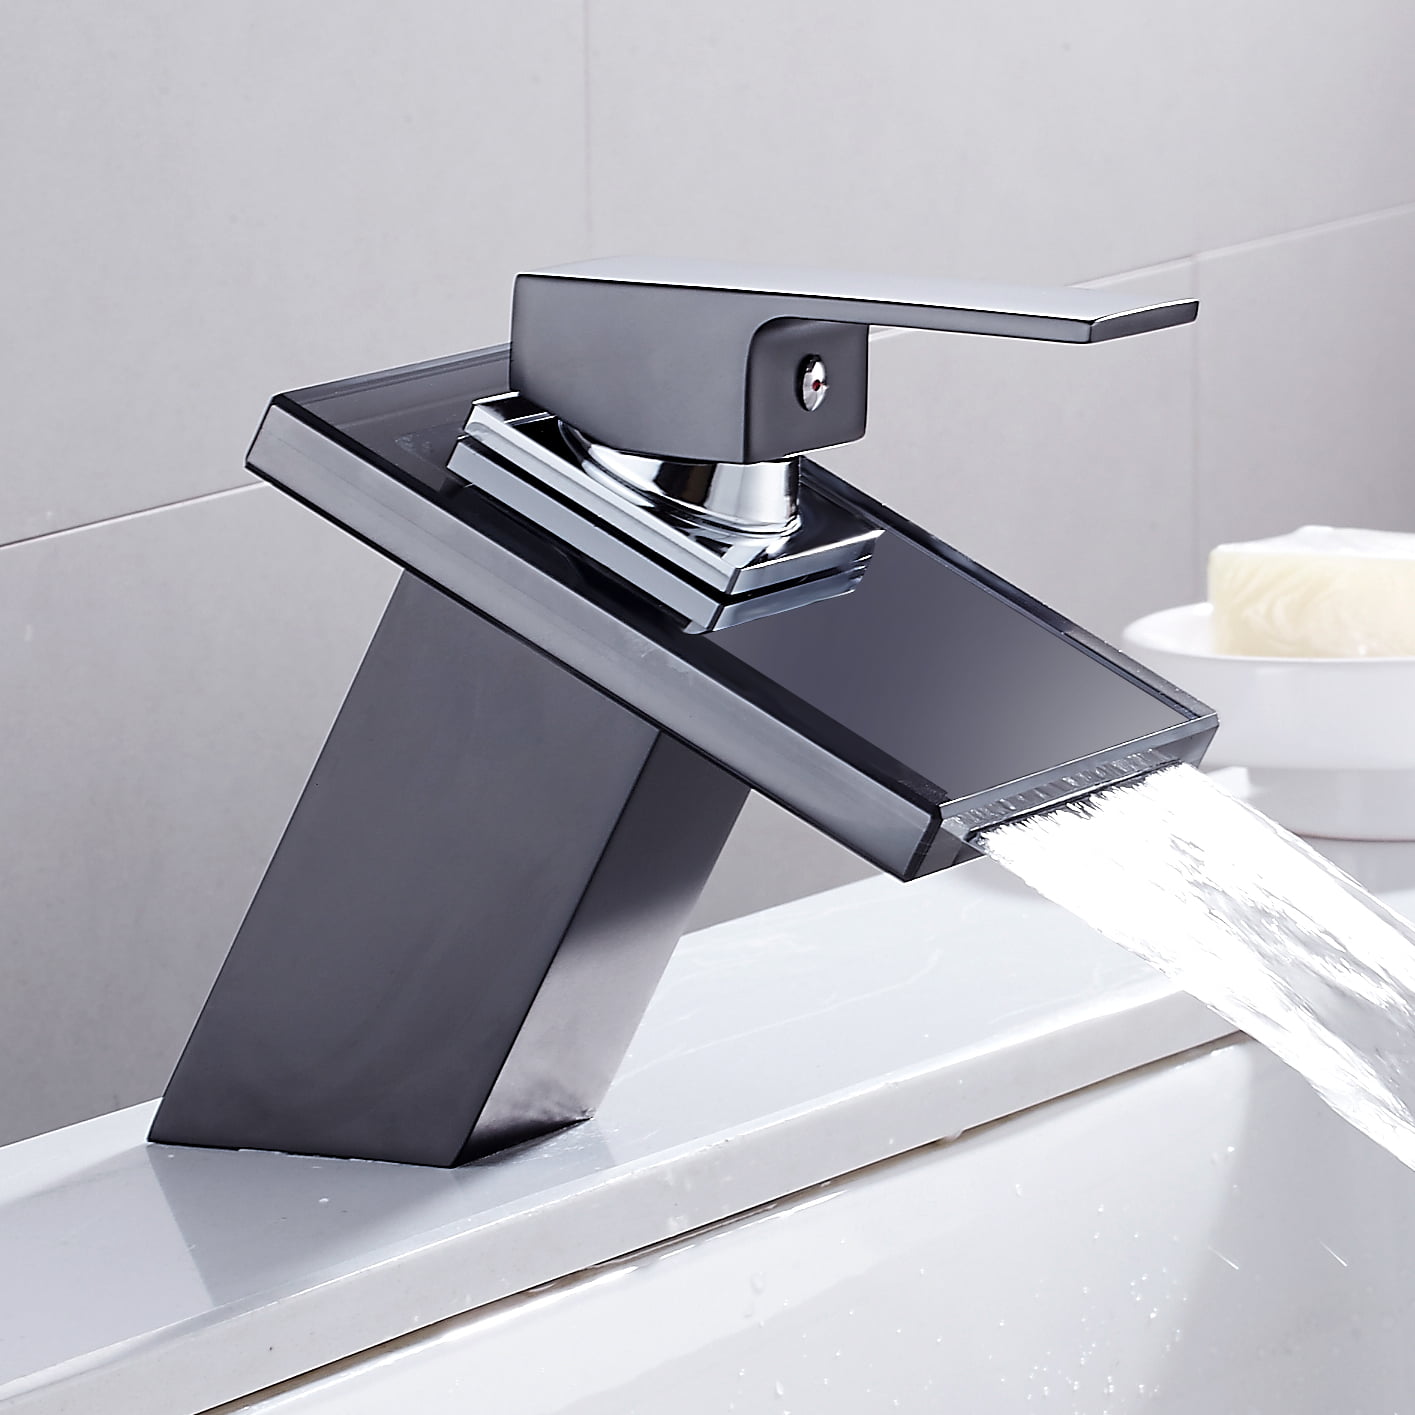 Bathroom Basin Faucet Tempered Glass Waterfall Spout Deck Mount 1 Hole Mixer Tap 